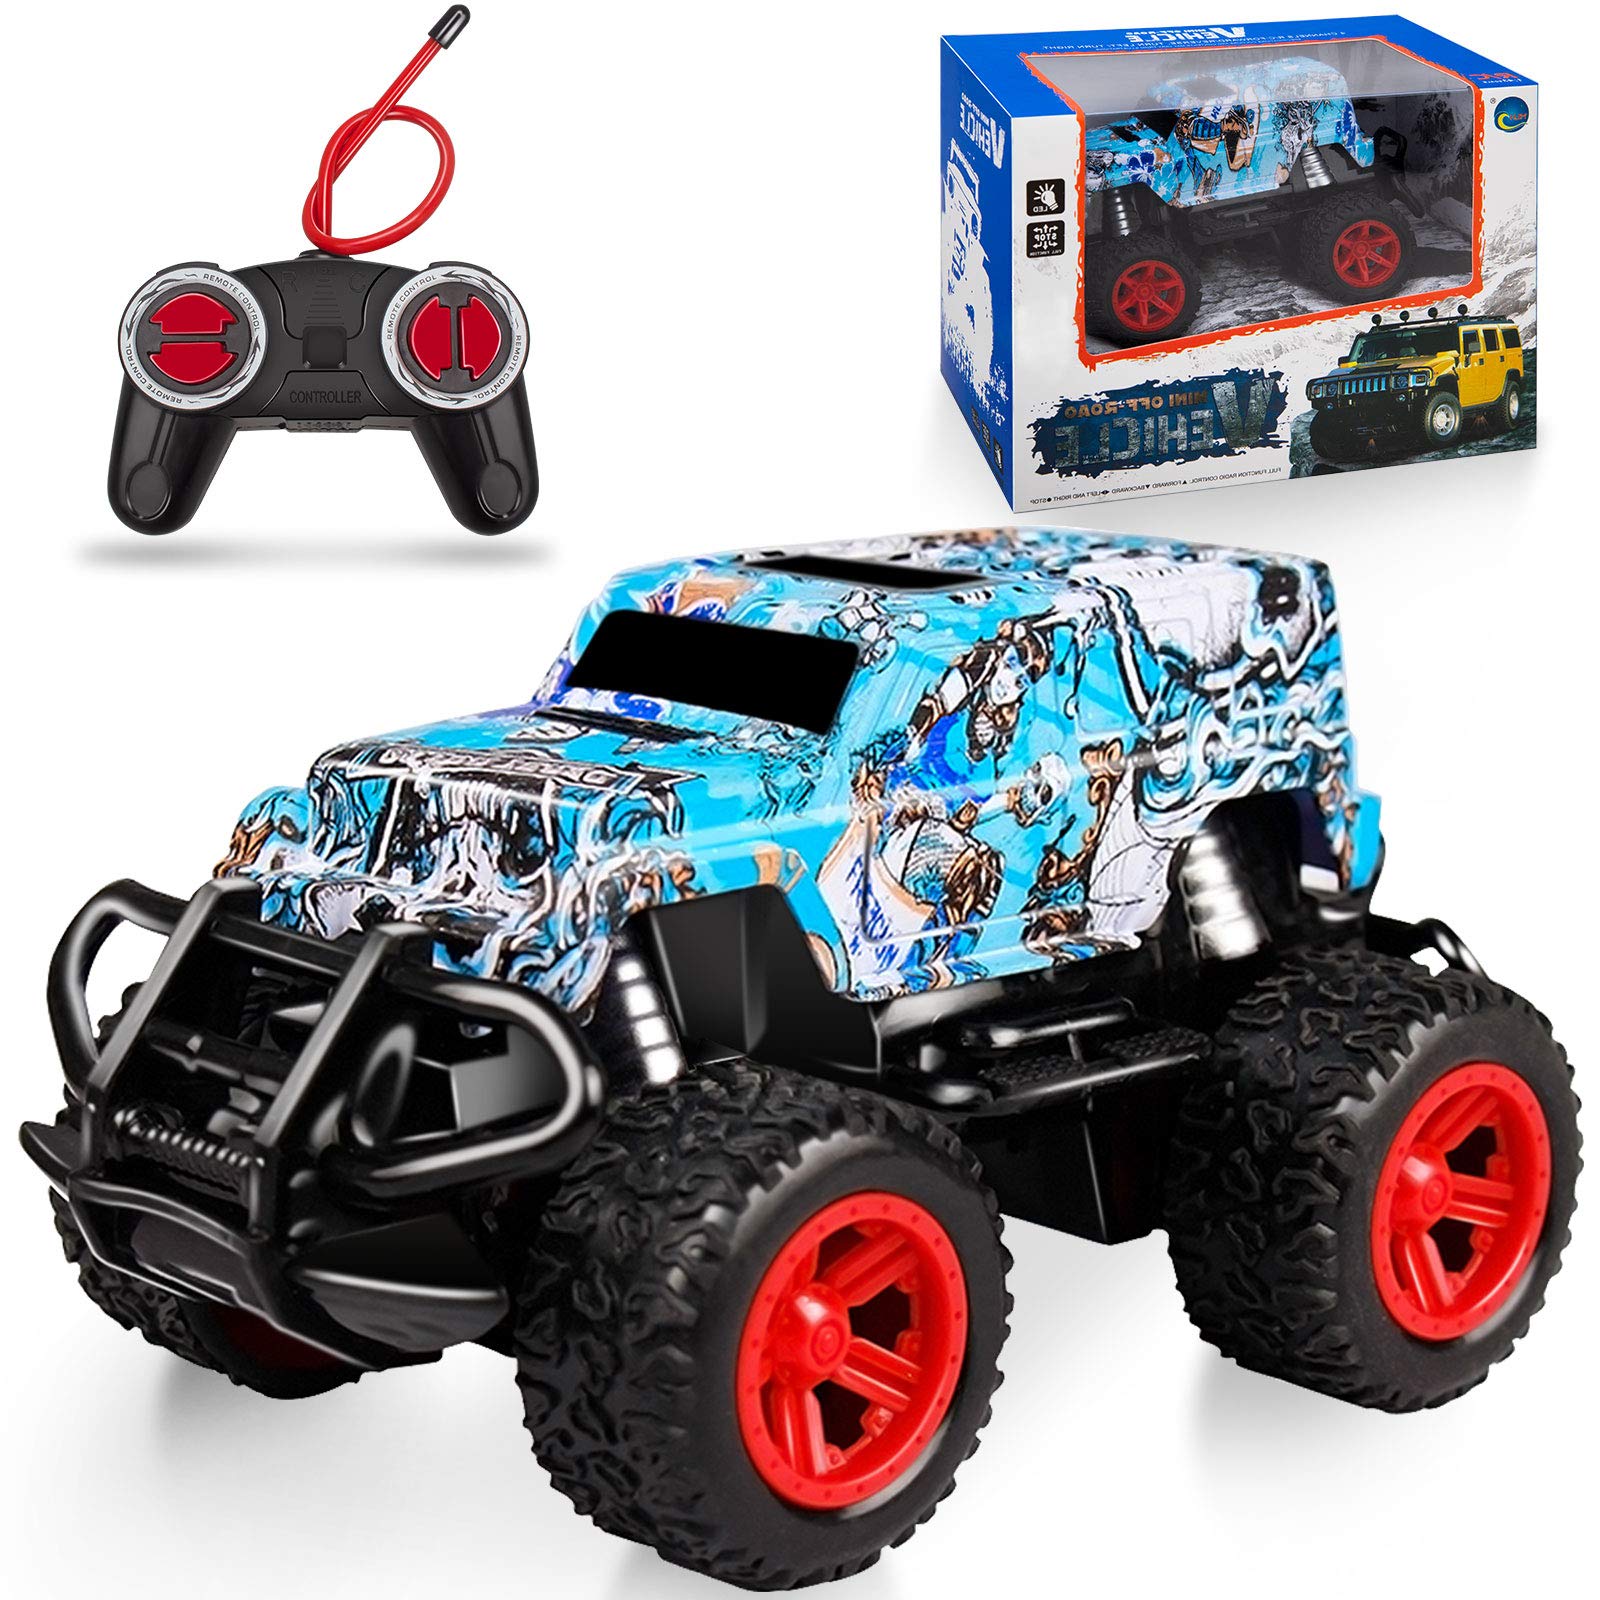 NARRIO Kids Toys for 3 4 5 6 Year Old Boys Birthday Gift, Remote Control Car for Boys 3-5 RC Cars Monster Trucks for Boy Toys Age 4-7, Christmas Teen Gifts for 3-7 Year Old Boys Toddler Toys Age 2-6